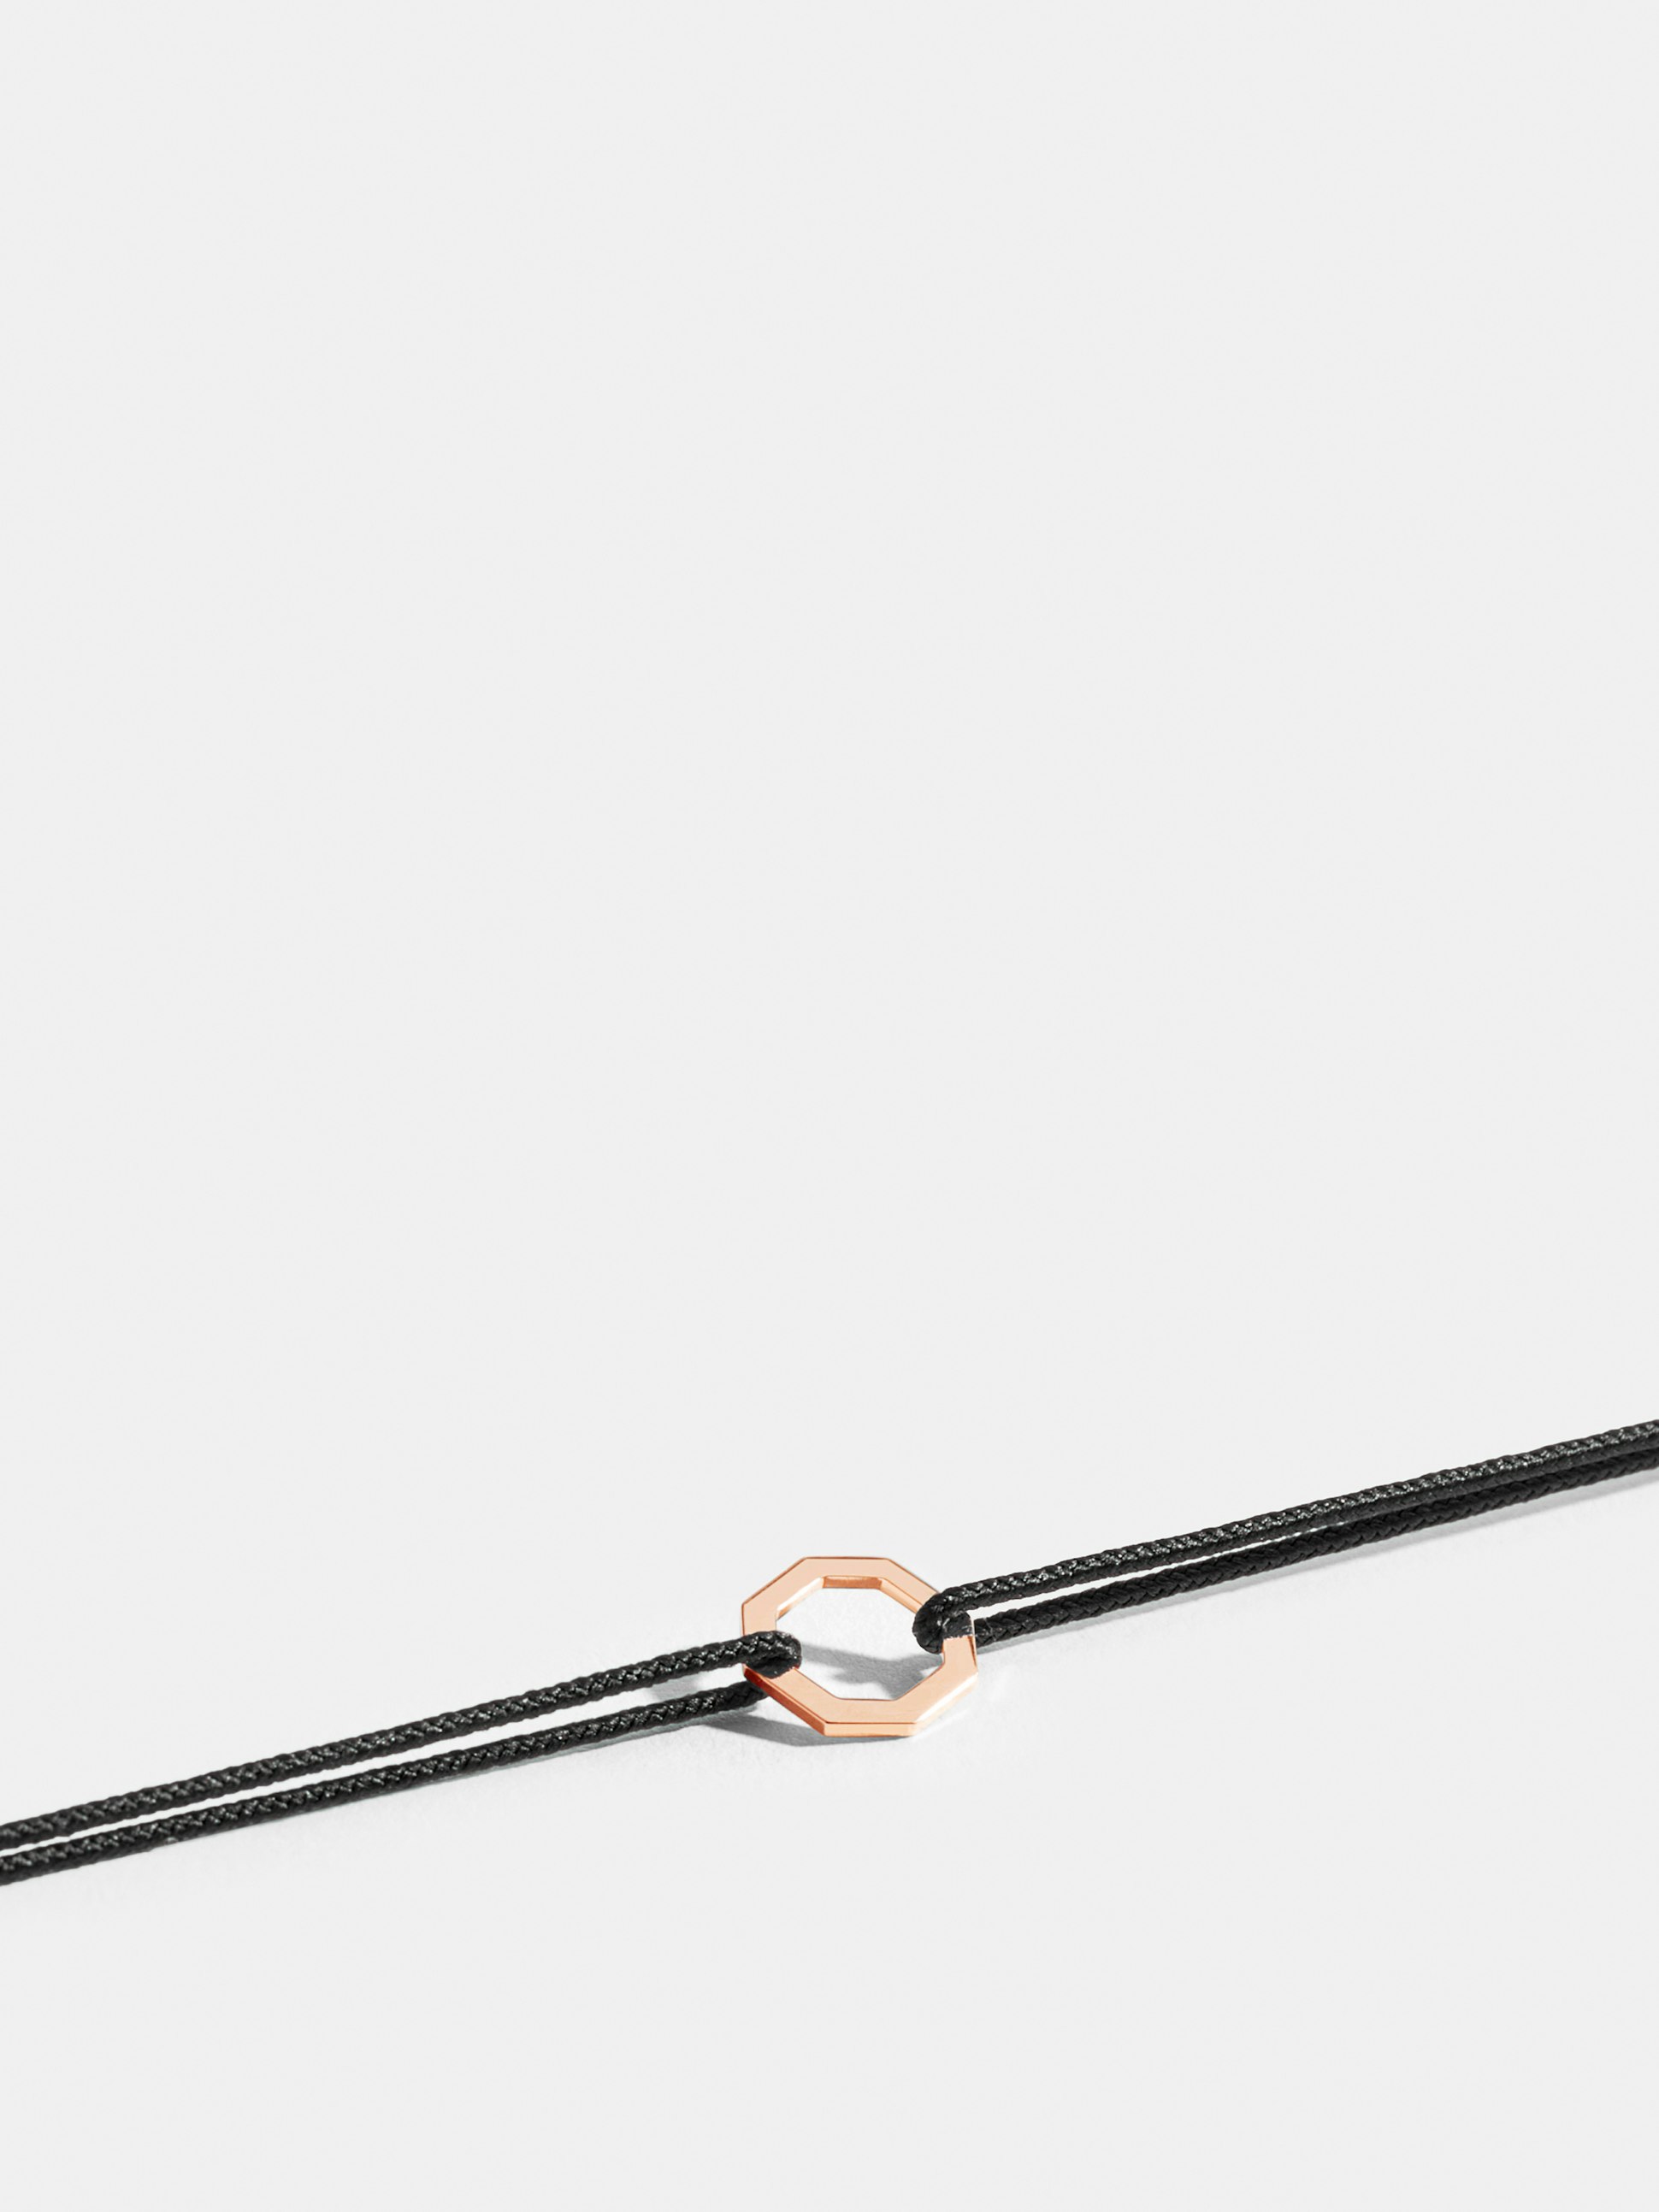 Octogone motif in 18k Fairmined ethical rose gold, on a black cord. 